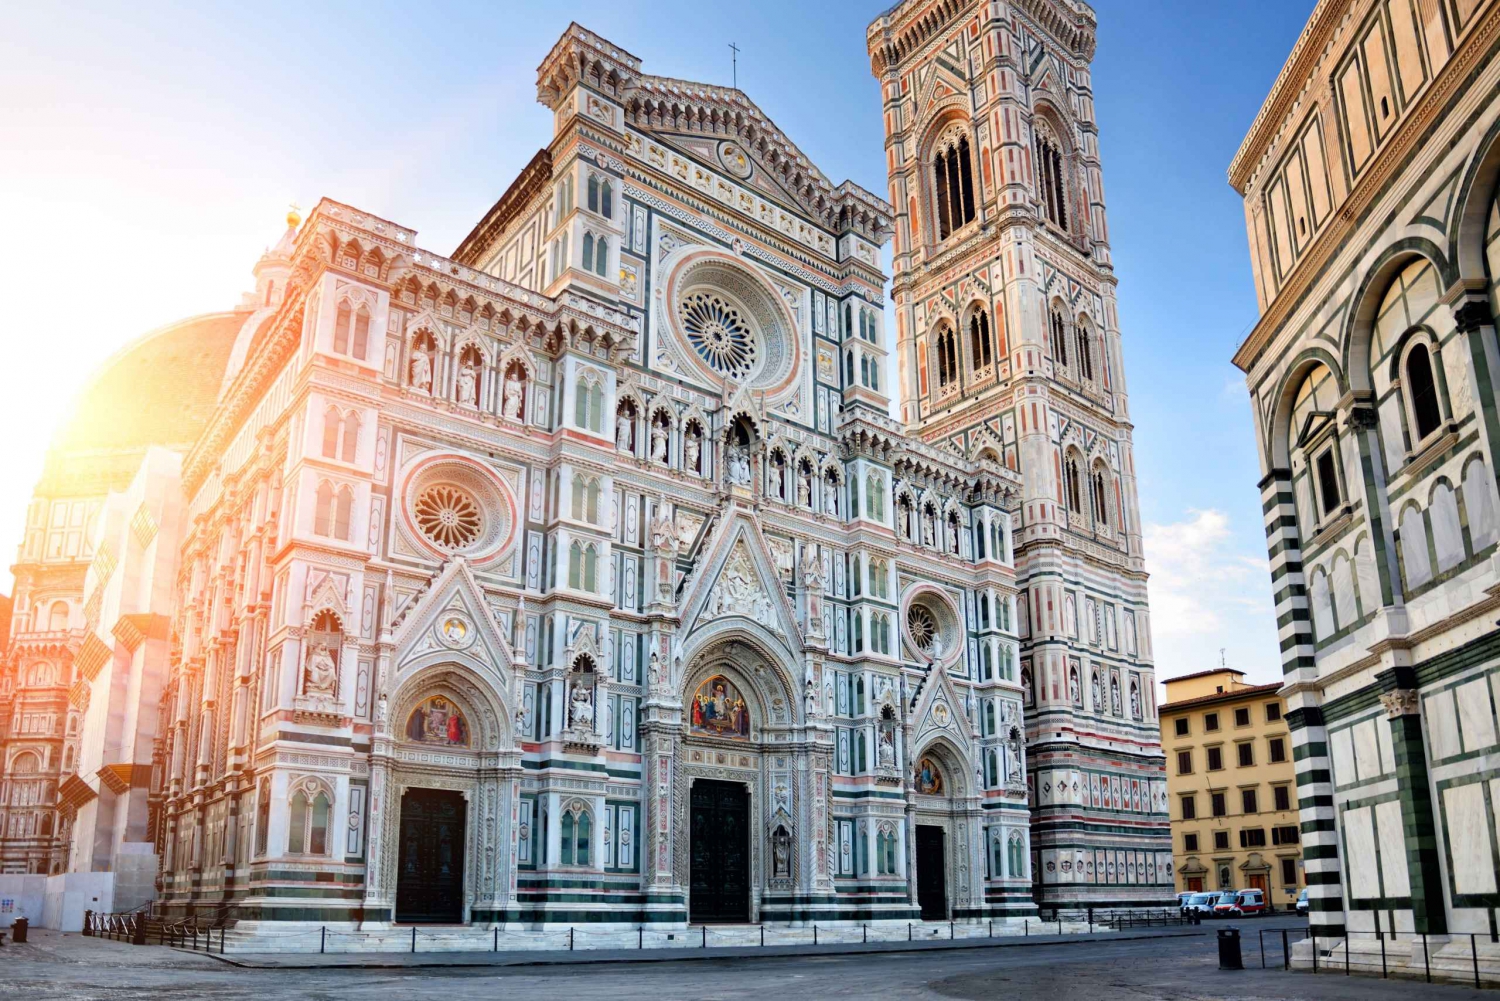 Guided Tour of Duomo Complex with Admission to Cupola Climb